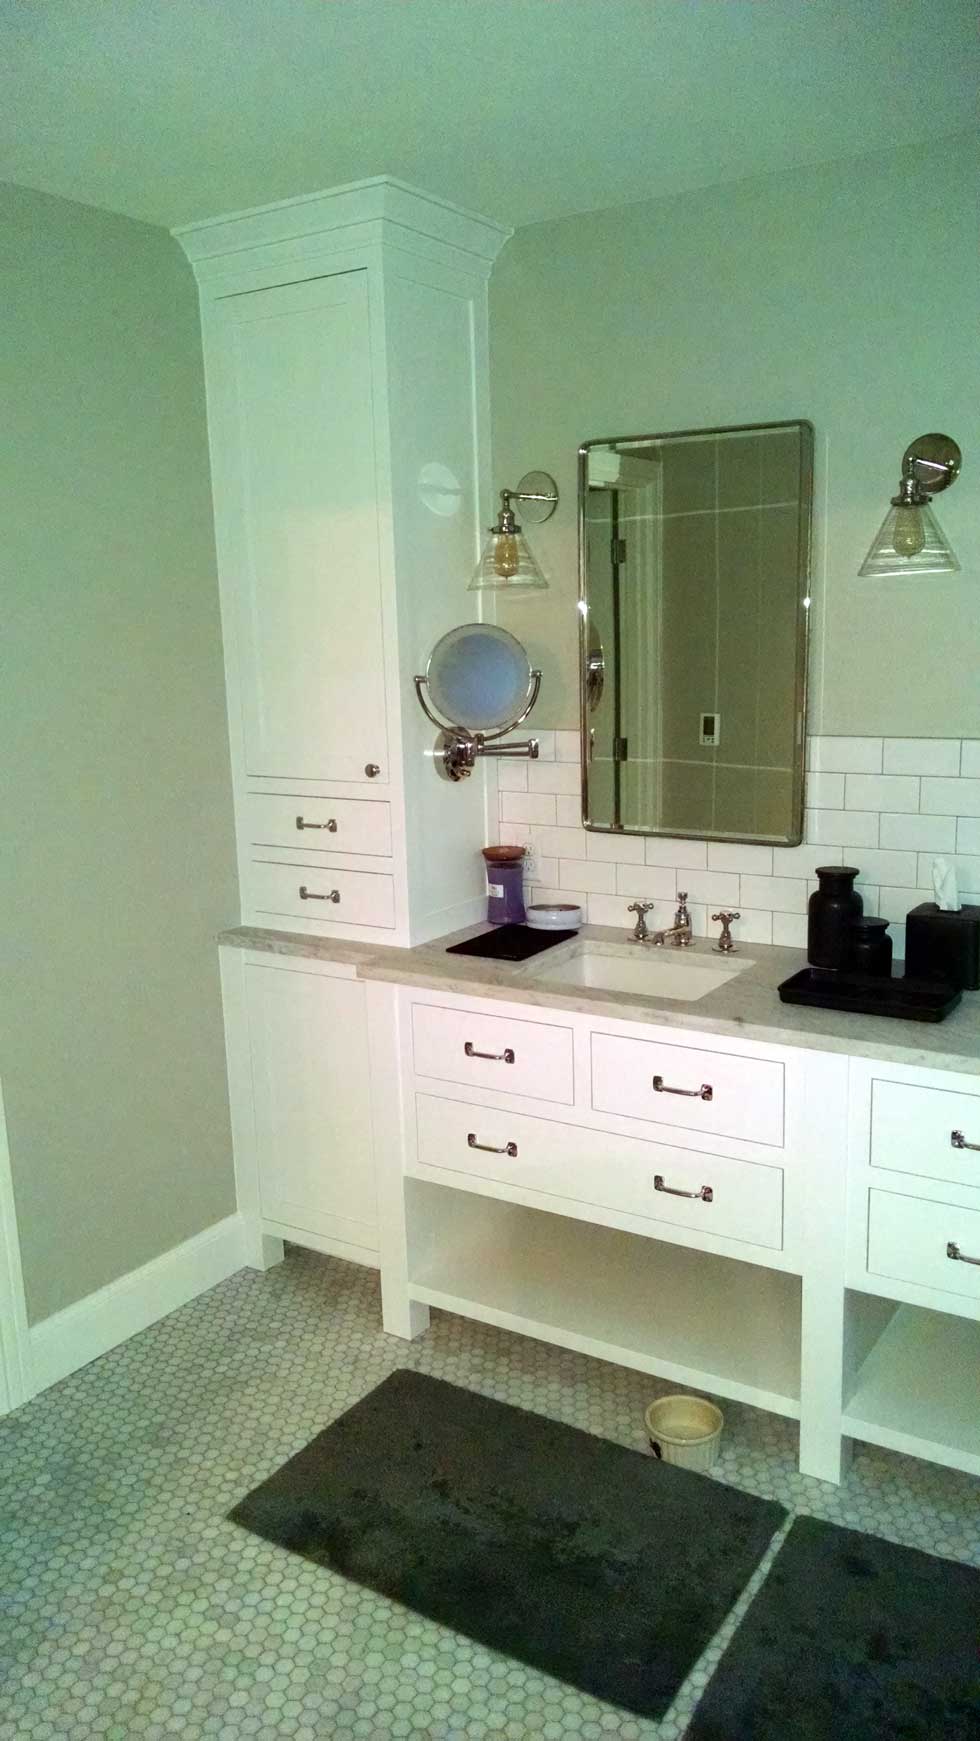 White bathroom cabinetry